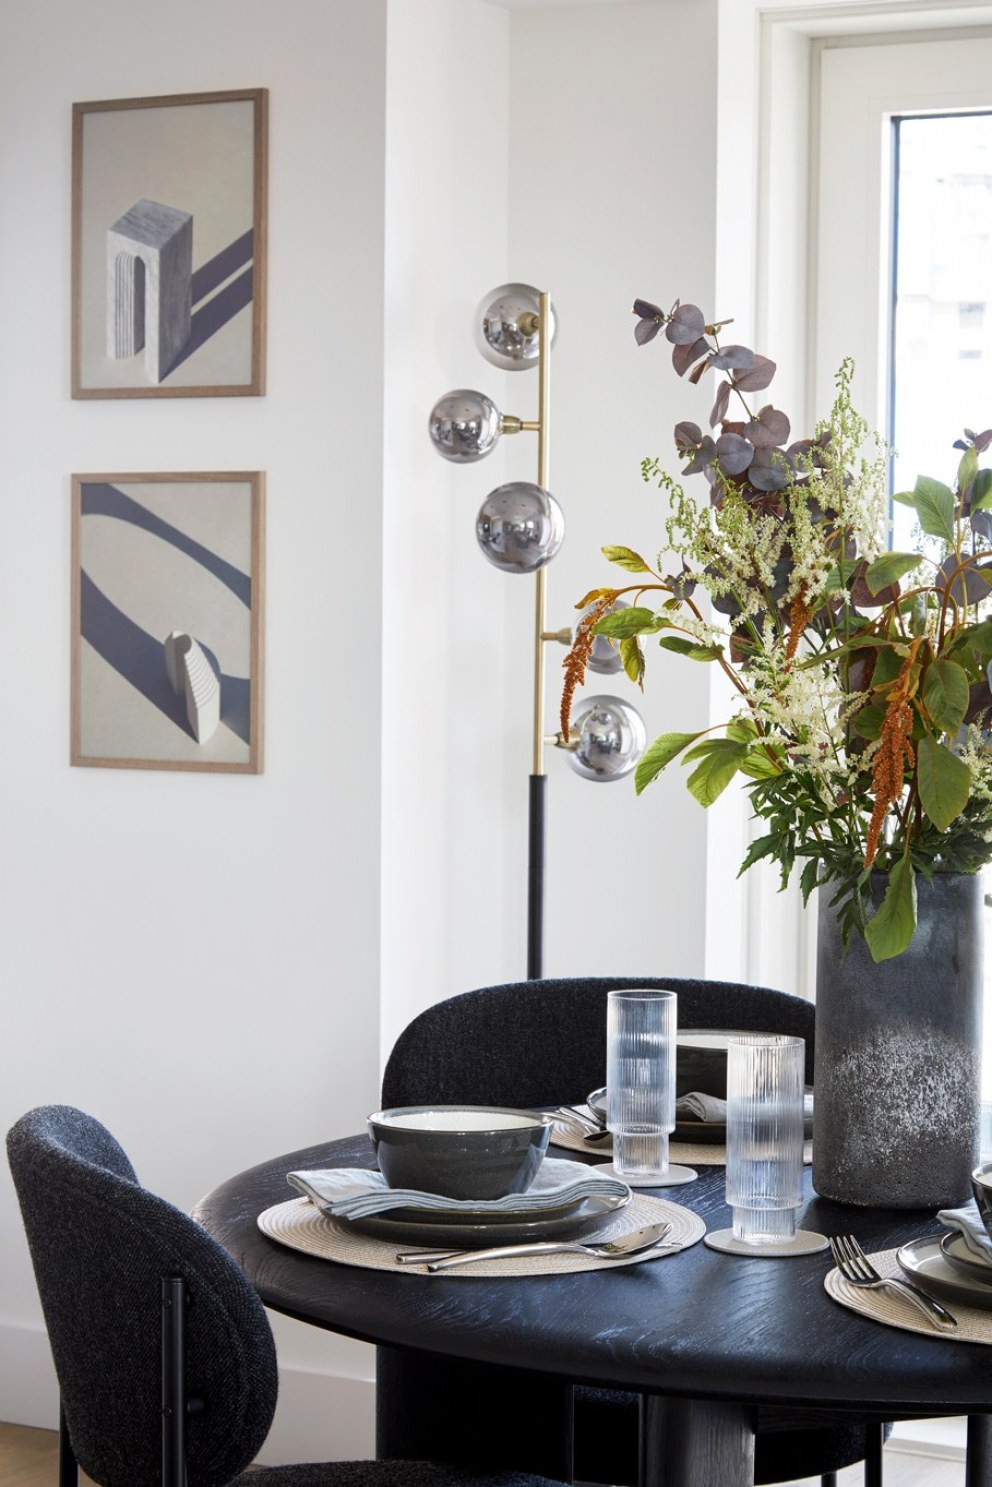 Vauxhall Project  | Dining Space | Interior Designers